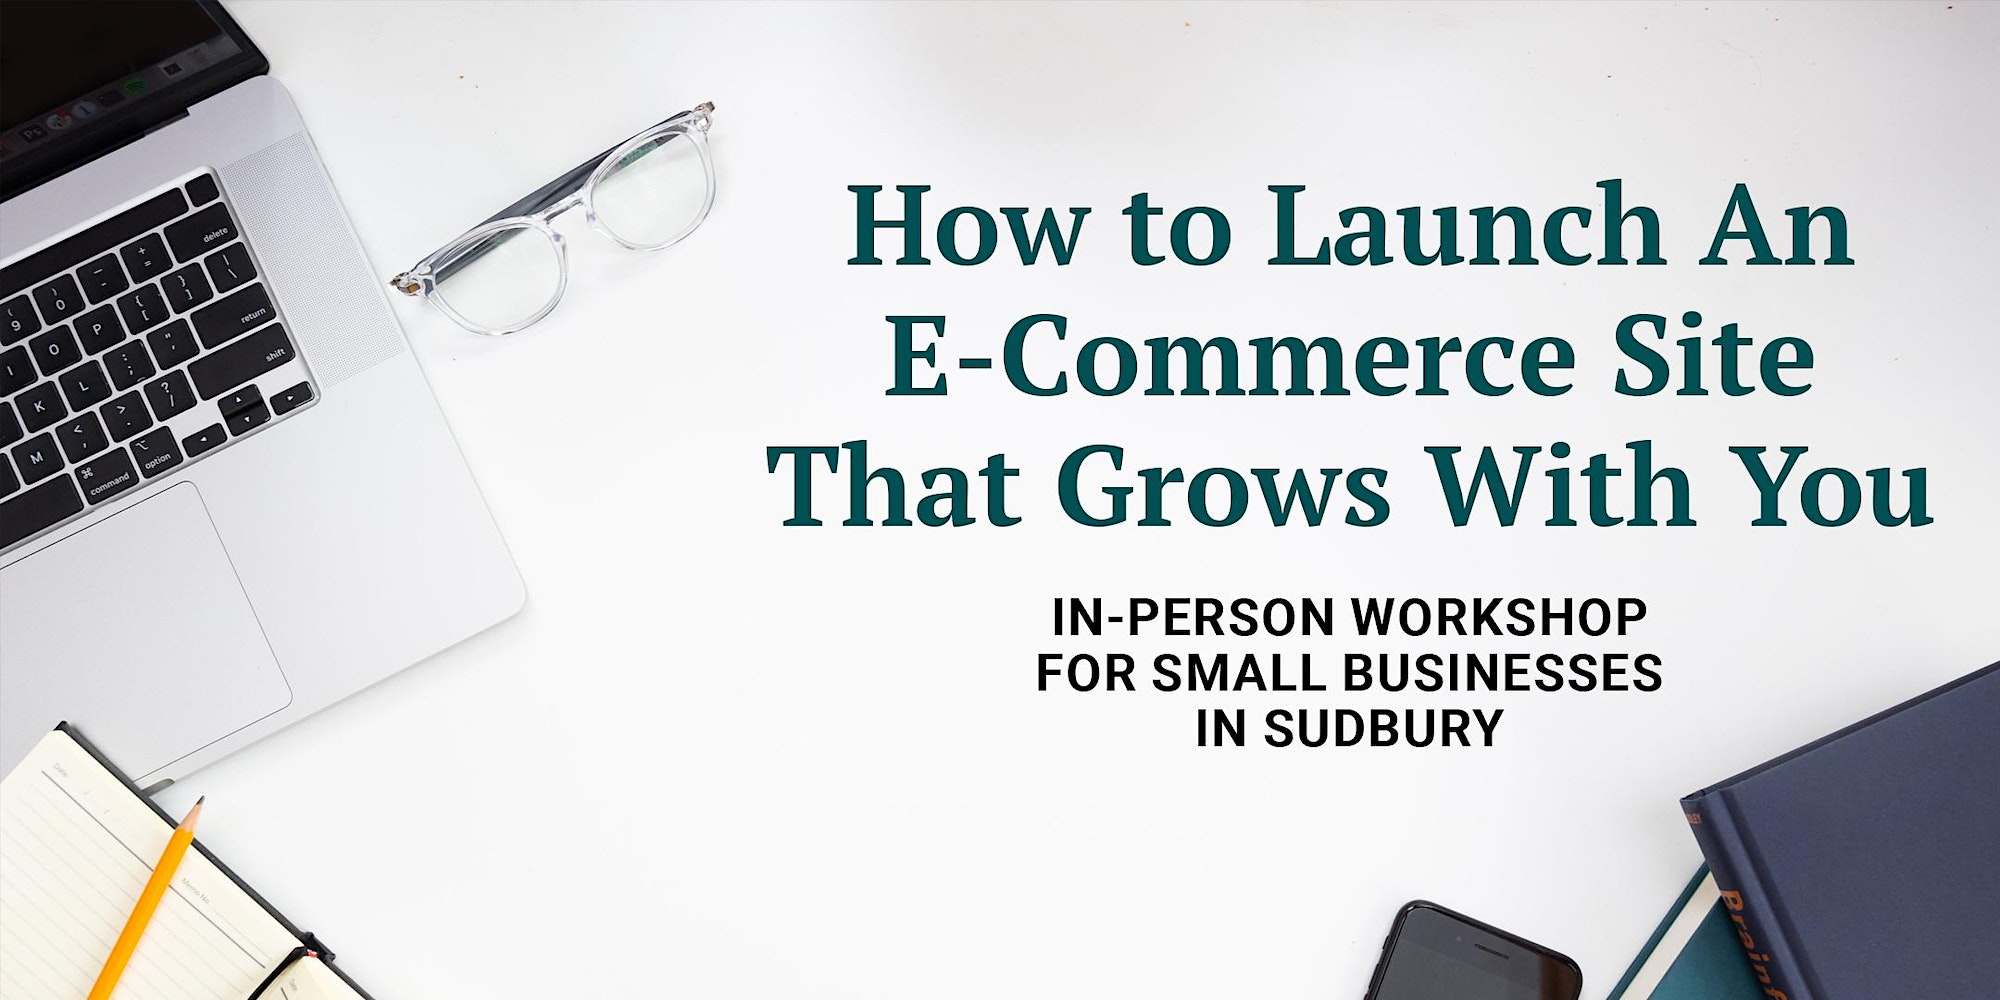 How to launch an e-commerce site that grows with you. In-person workshop for small businesses in Sudbury.